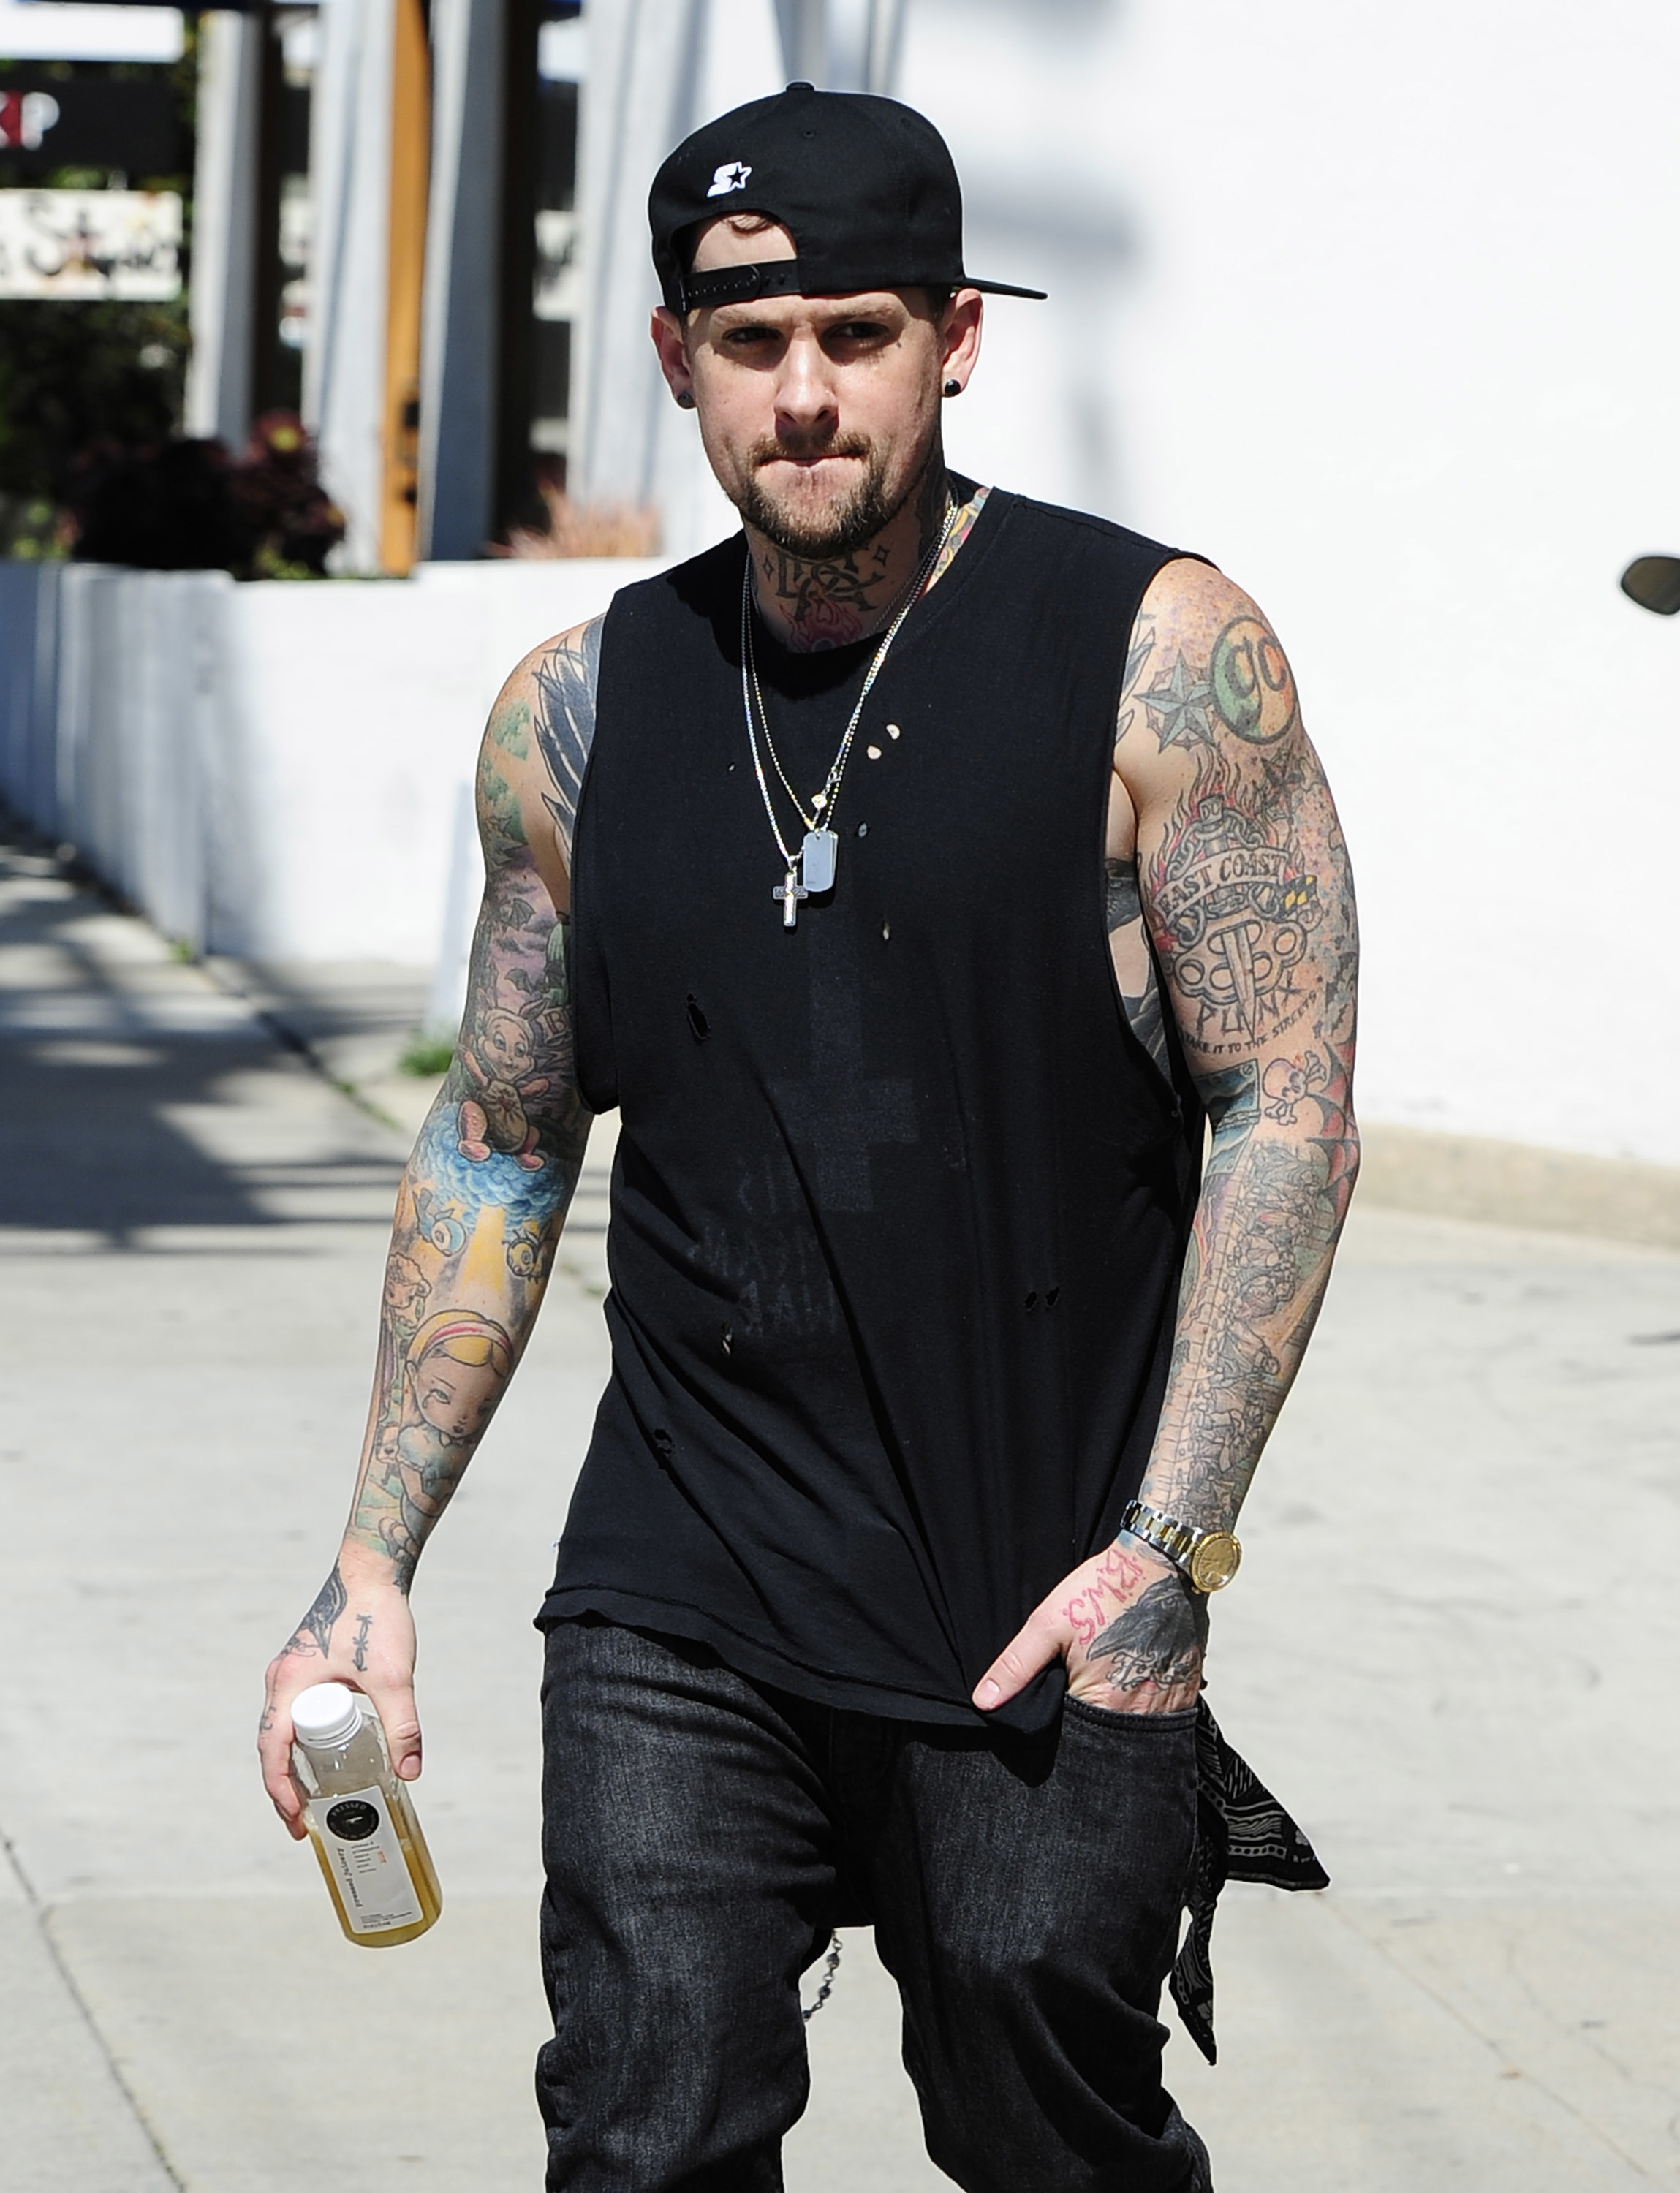 Benji Madden joins celebrity ink club tattoos Cameron Diazs name across  chest